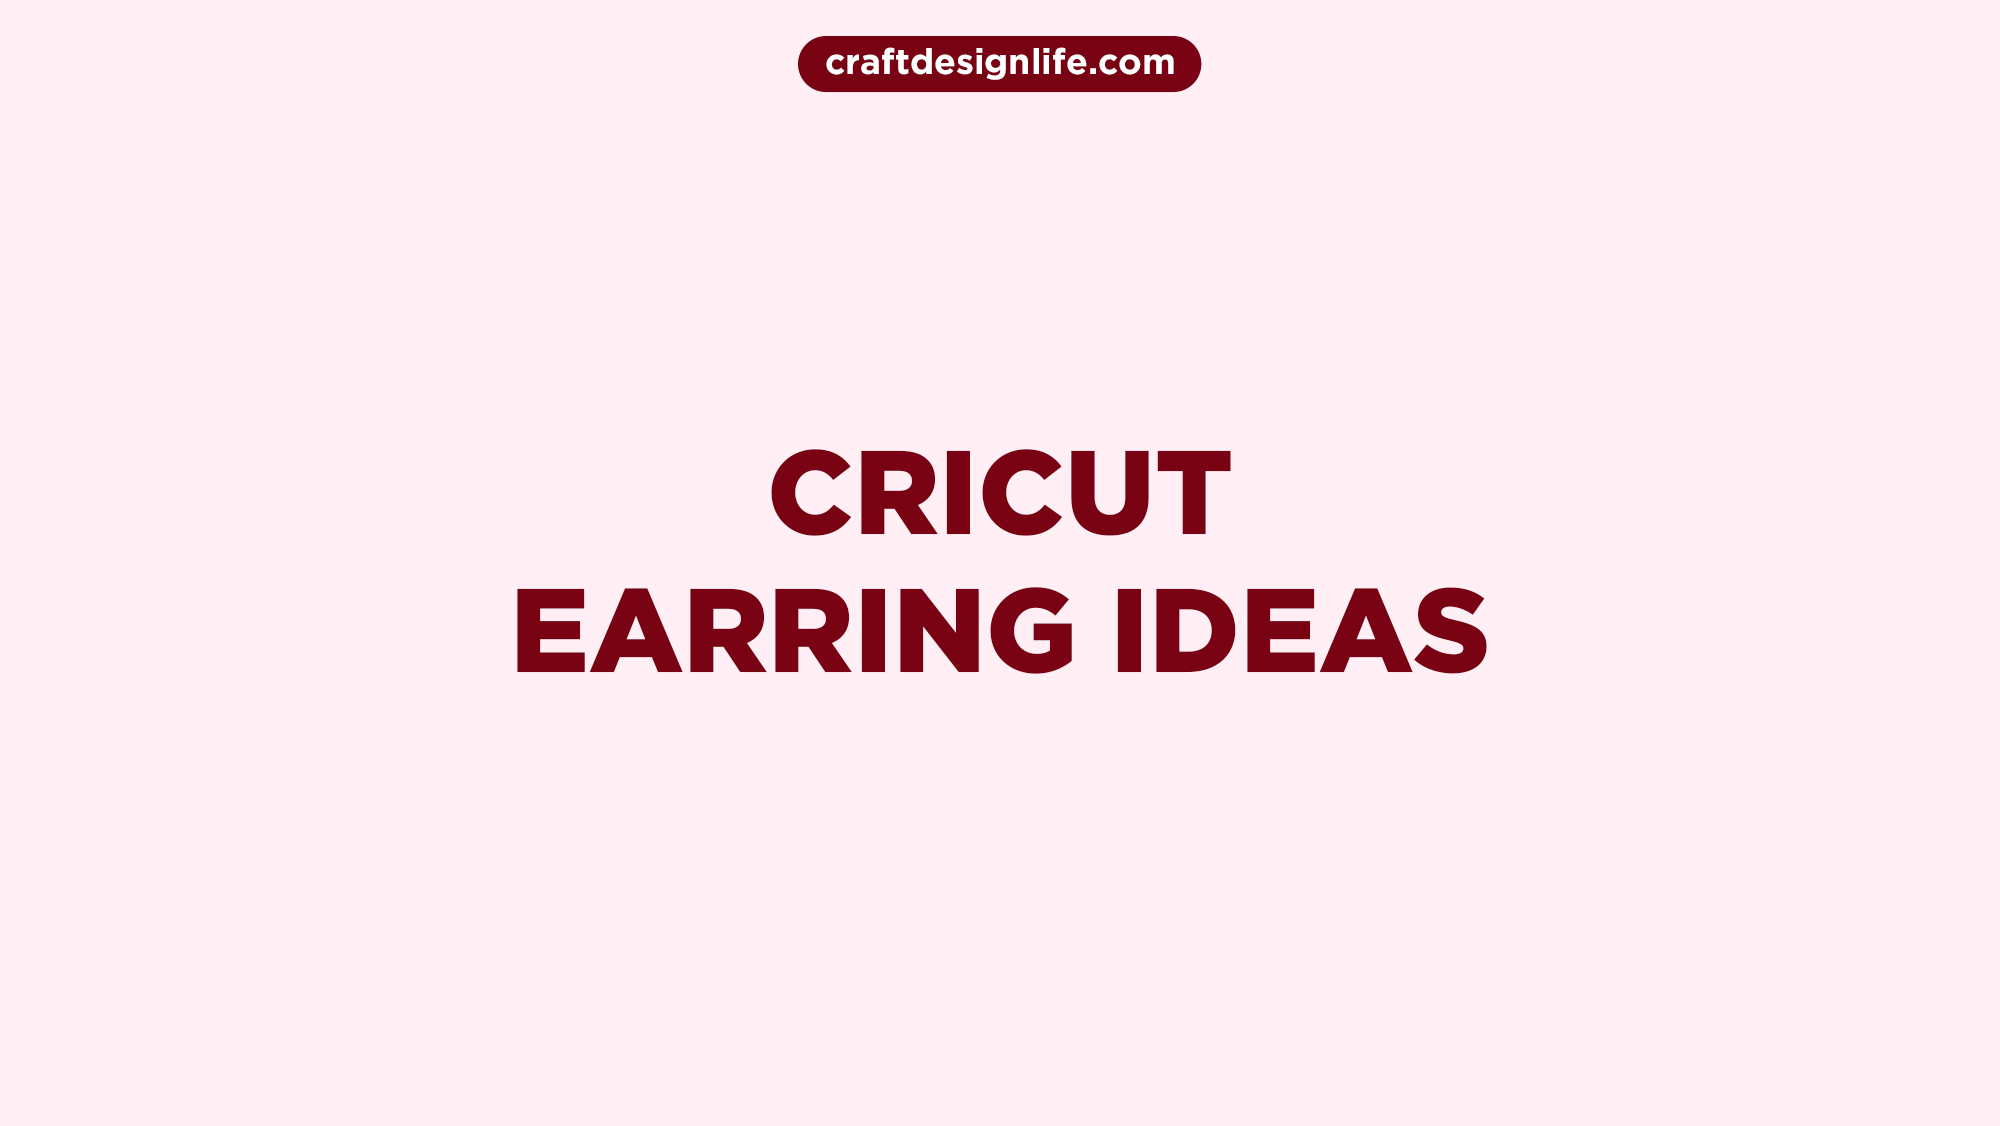 Cricut Earring Ideas for Fashionable DIY Projects